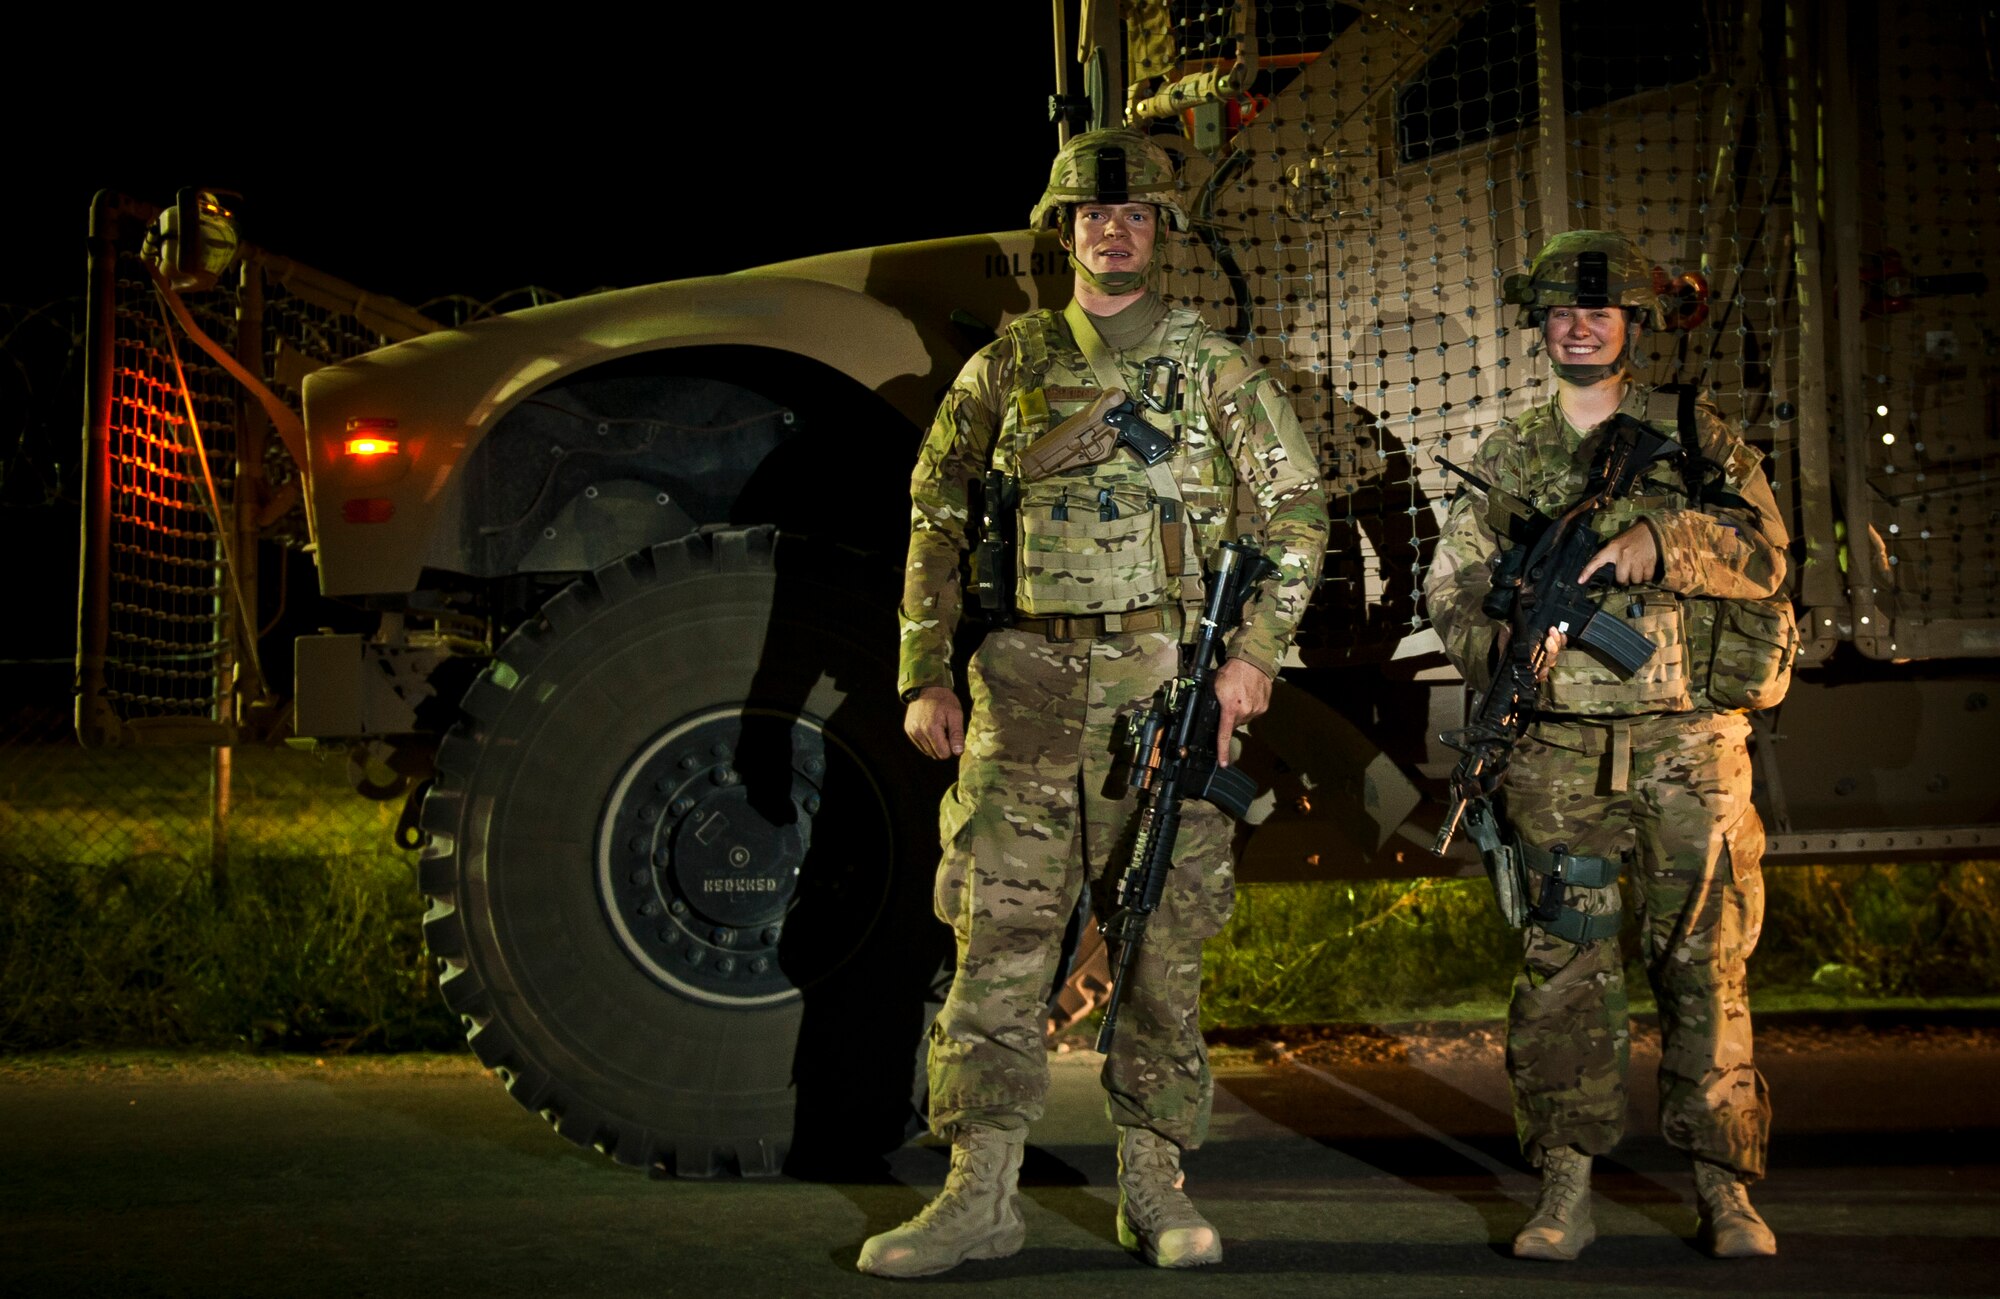 SSgt Elijah Langhorn and A1C Kirsten Hamilton, perimeter response team Airmen assigned to the 455th Expeditionary Security Forces Squadron, stand in front of their tactical vehicle during a sweep of the outer perimeter at Bagram Airfield Afghanistan, Aug. 17, 2012. Bagram defenders utilize a combination of static and mobile teams to protect the base from outside threats. (U.S. Air Force Photo/Capt. Raymond Geoffroy)